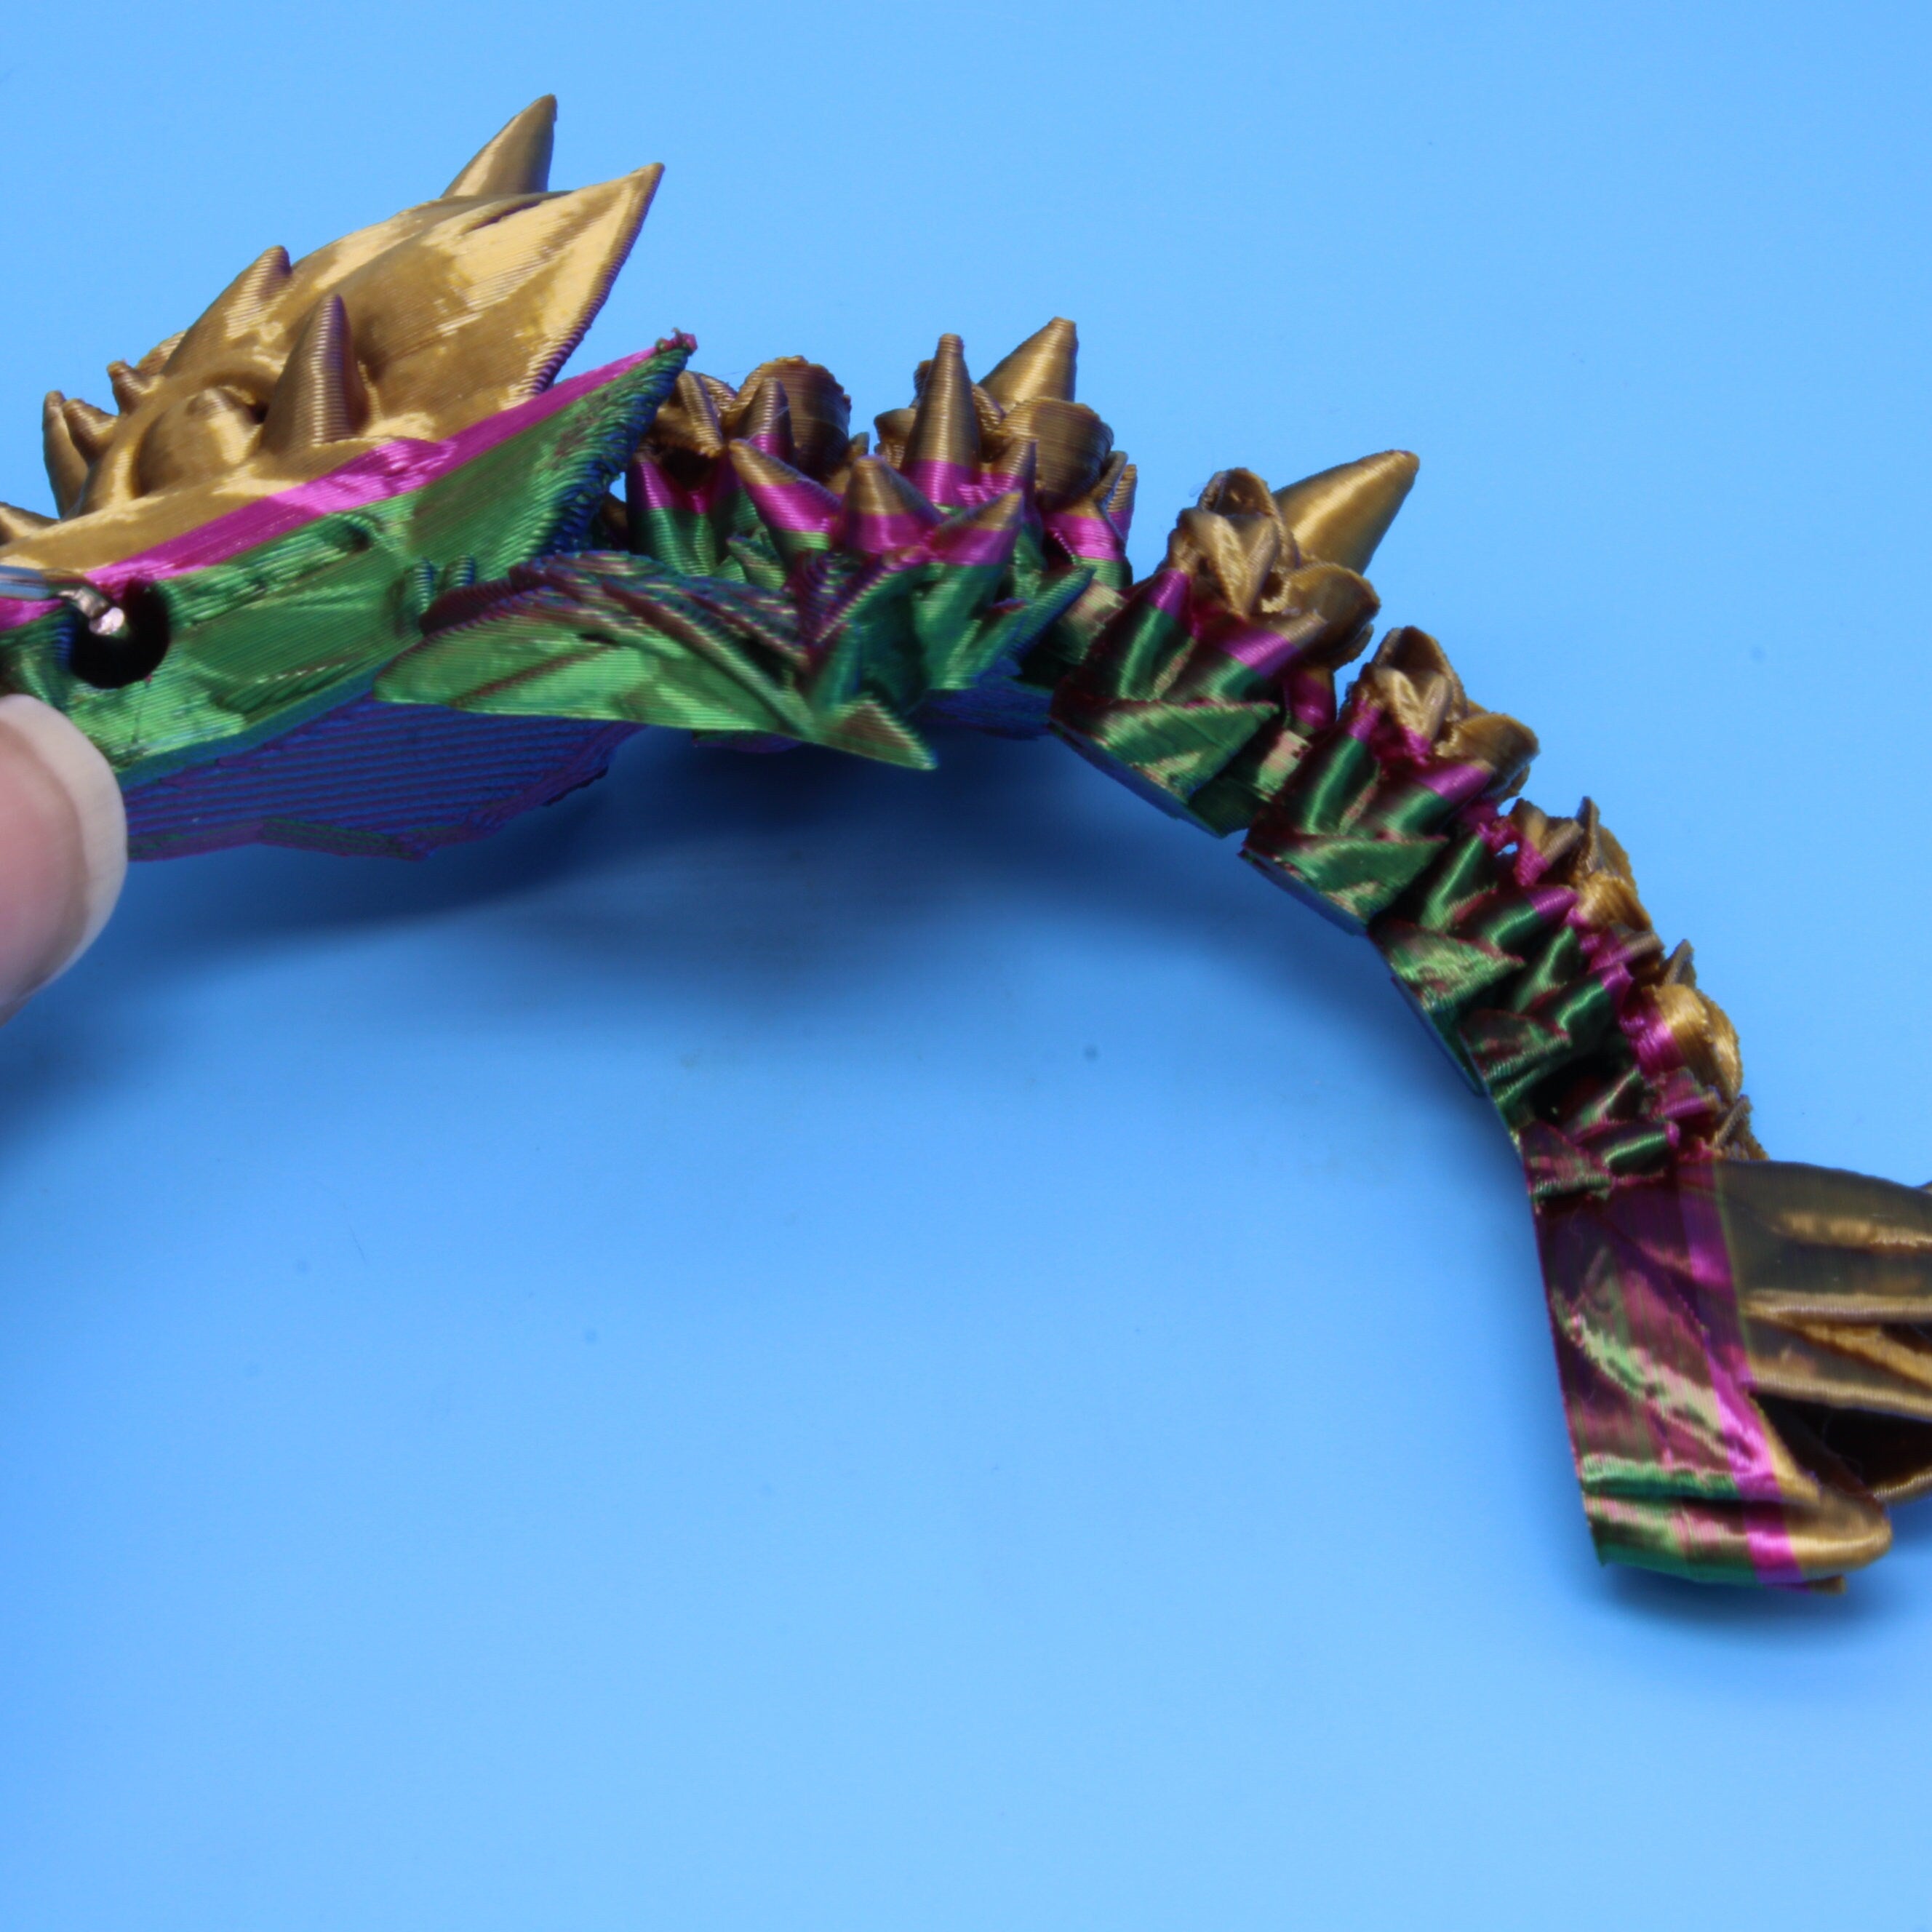 Baby Rose Dragon- Limited Edition Tadling Keychain | 3D Printed | 4.75 inches